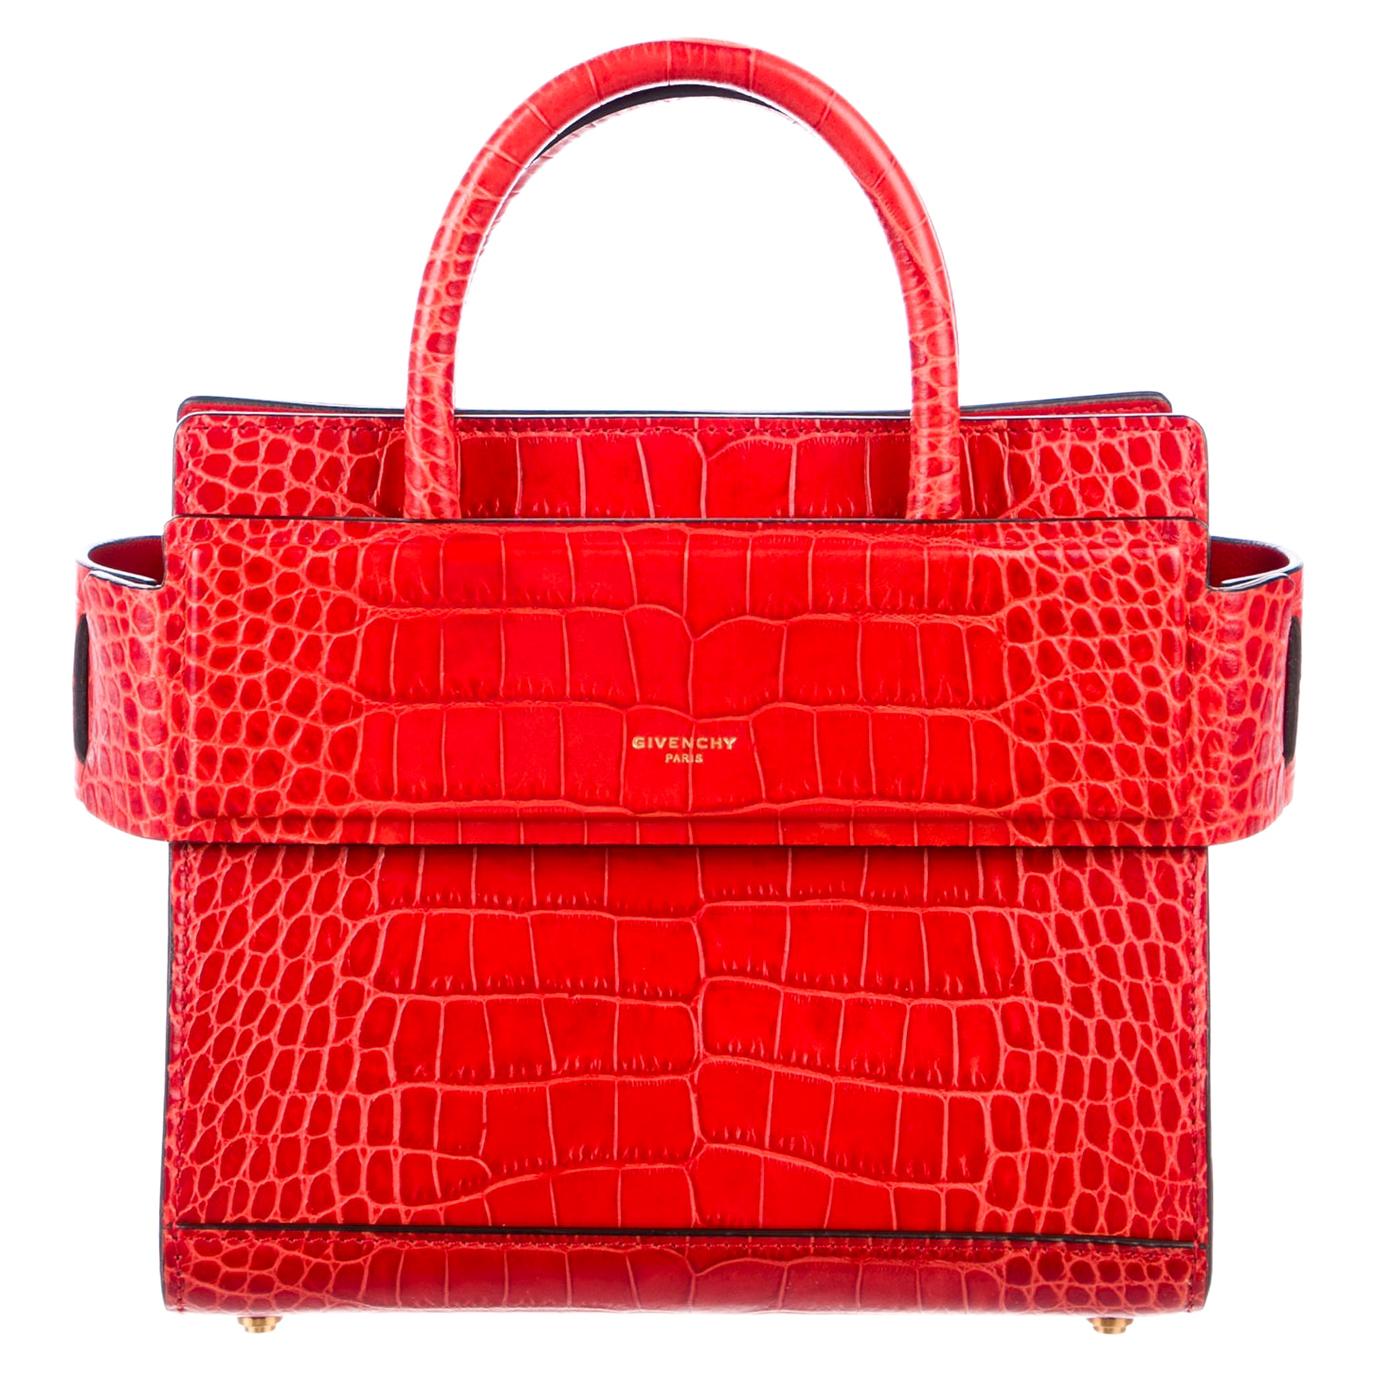 Givenchy NEW Red Alligator Exotic Small Mini Top Handle Satchel Shoulder Bag 